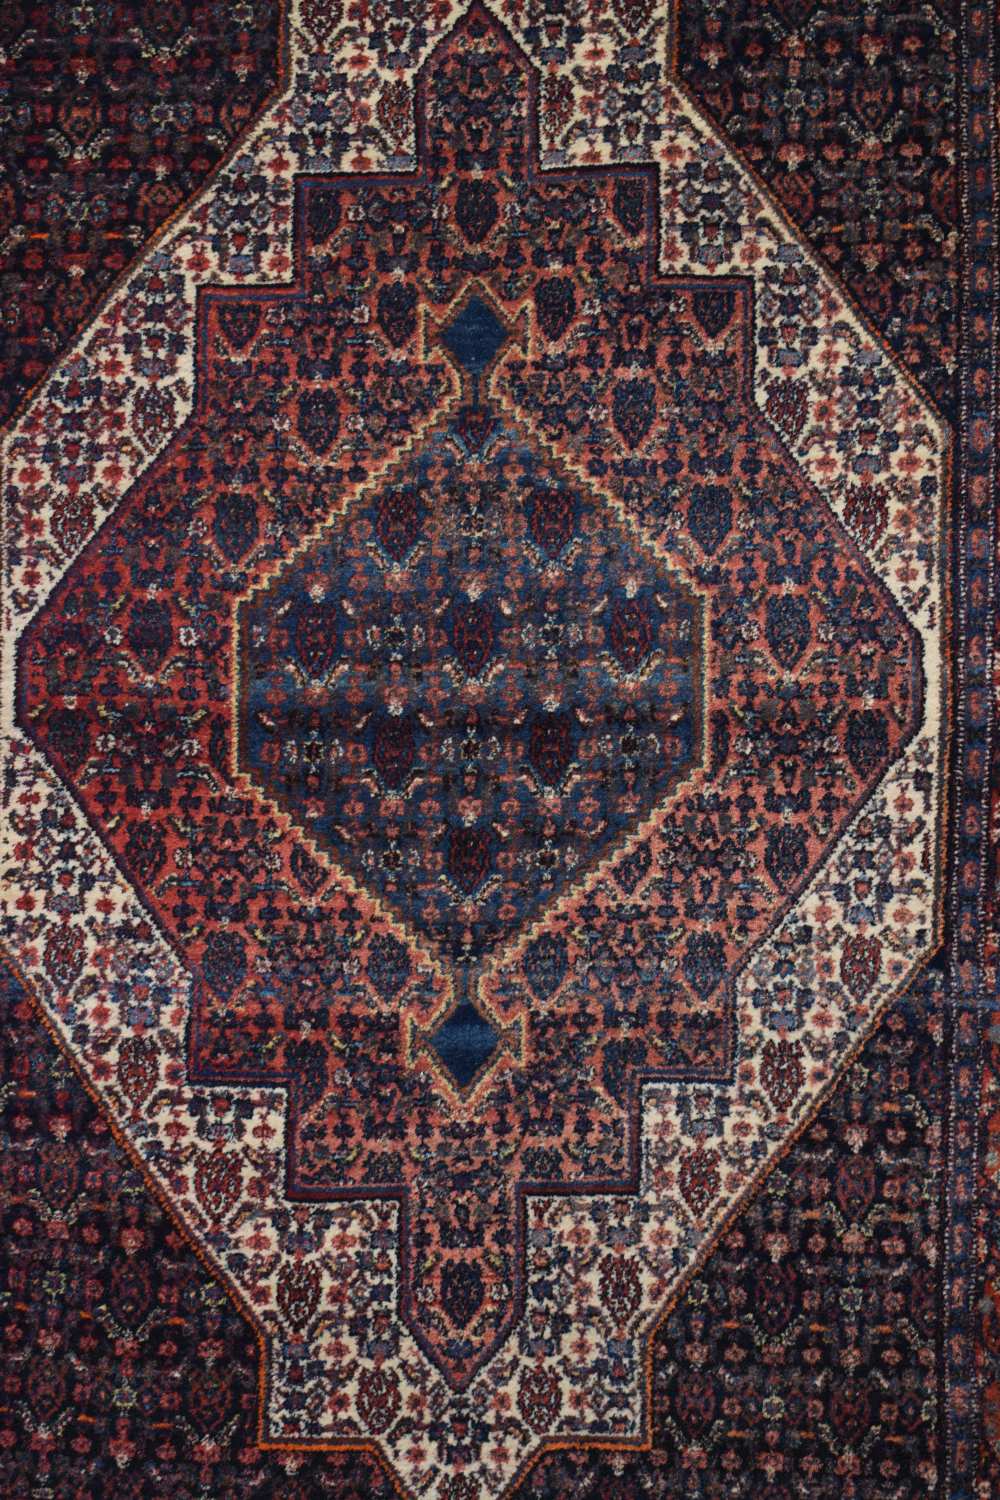 Senneh rug, Hamadan area, north west Persia, circa 1930s-40s, 6ft. 6in. X 4ft. 6in. 1.98m. X 1. - Image 9 of 10